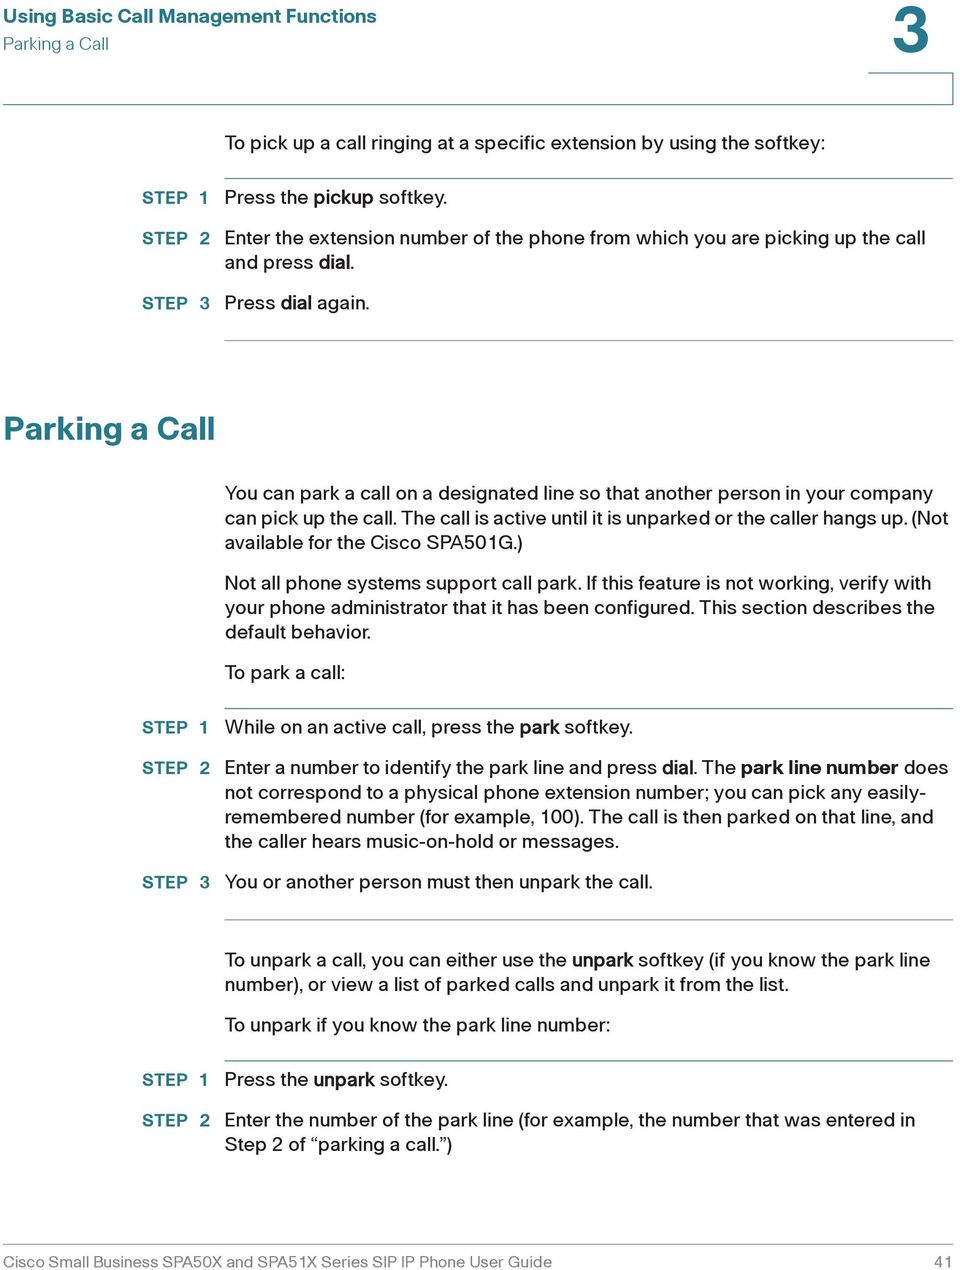 Parking a Call You can park a call on a designated line so that another person in your company can pick up the call. The call is active until it is unparked or the caller hangs up.